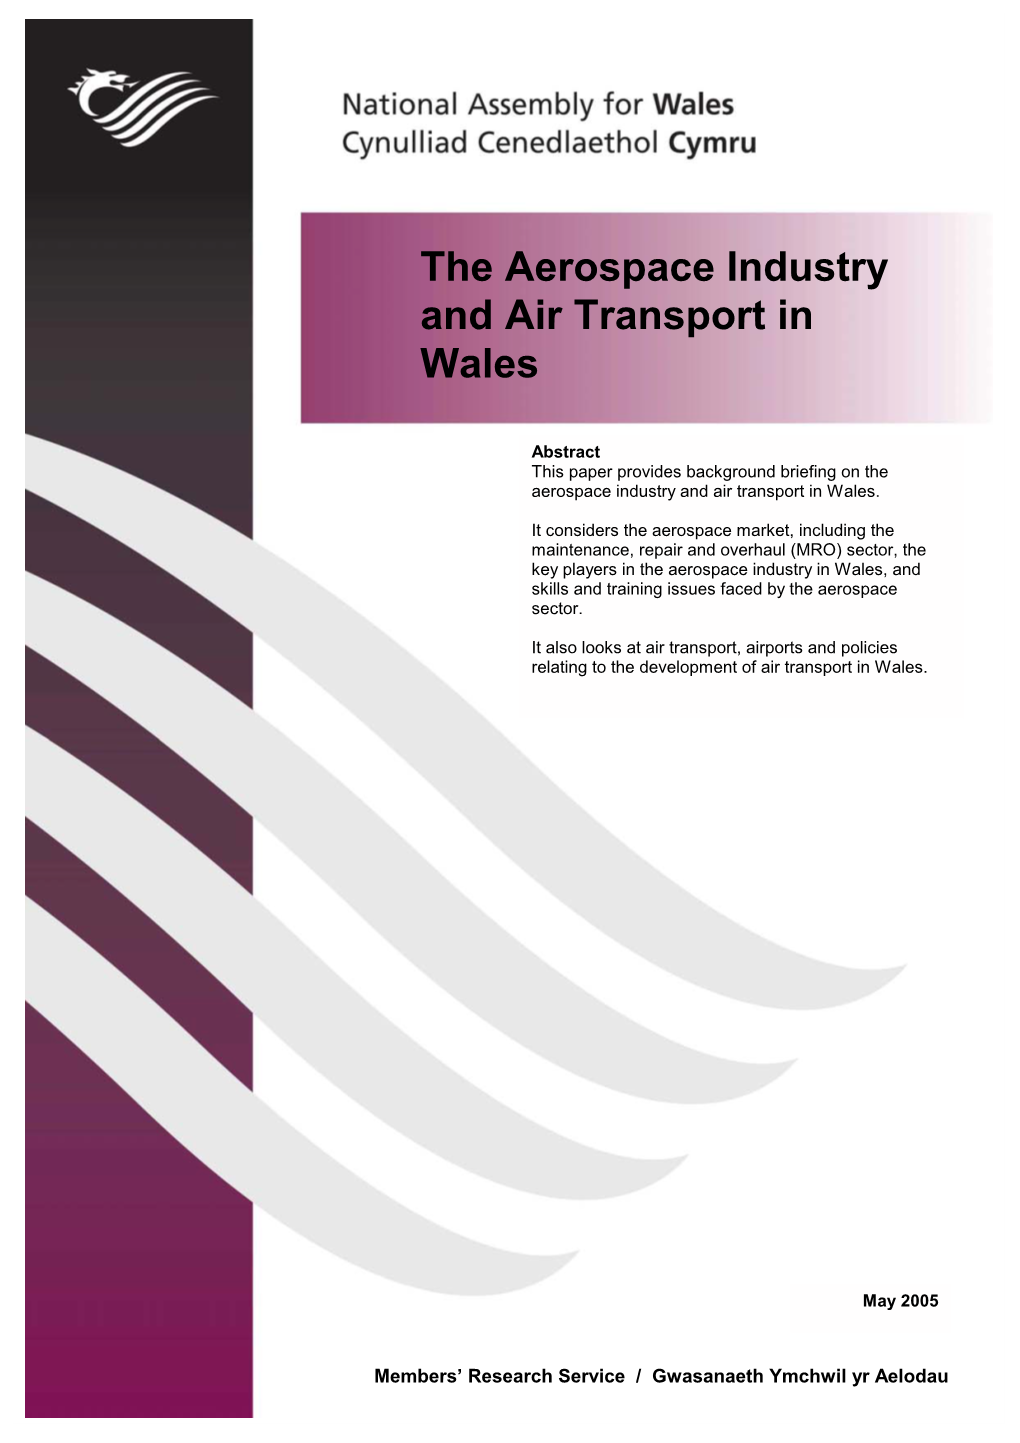 The Aerospace Industry and Air Transport in Wales